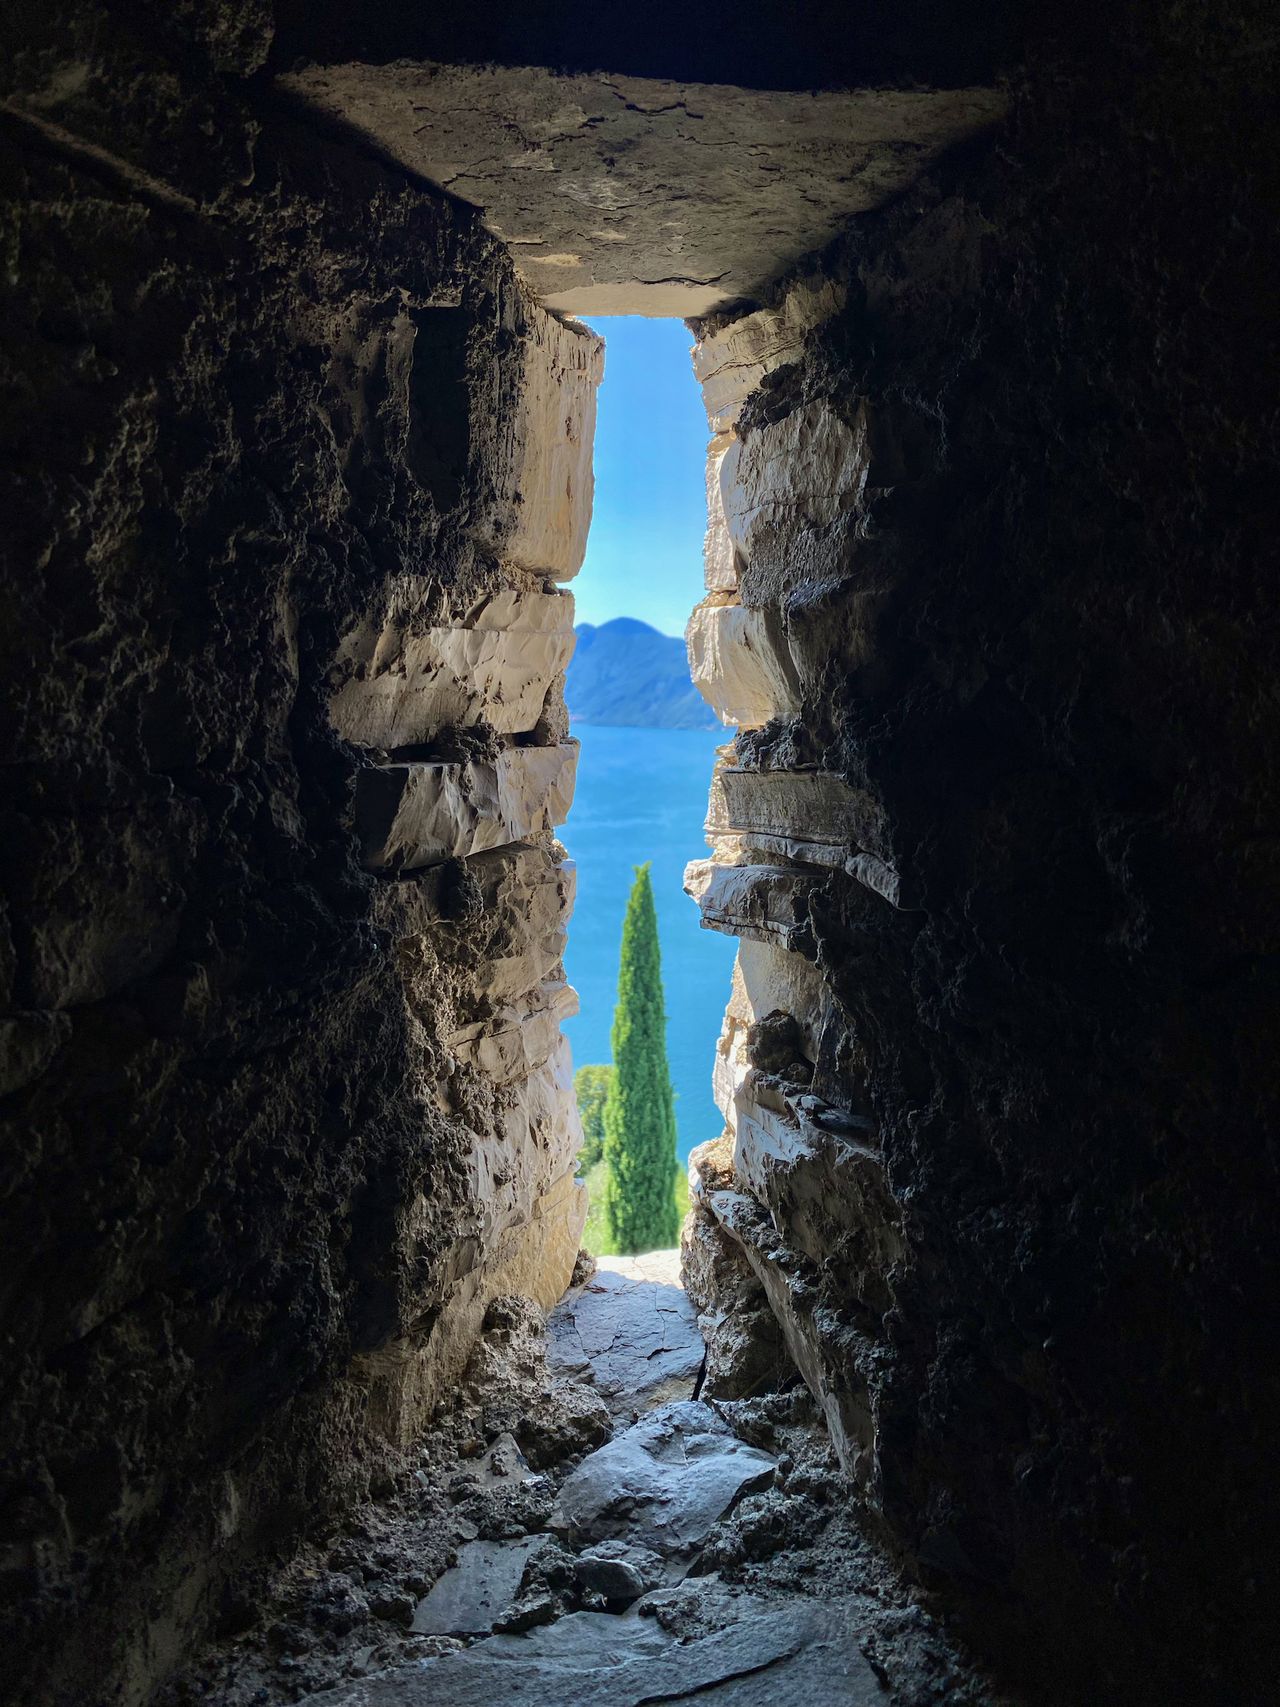 Looking through an archer's slot to a cyprus tree with the lake behind it.